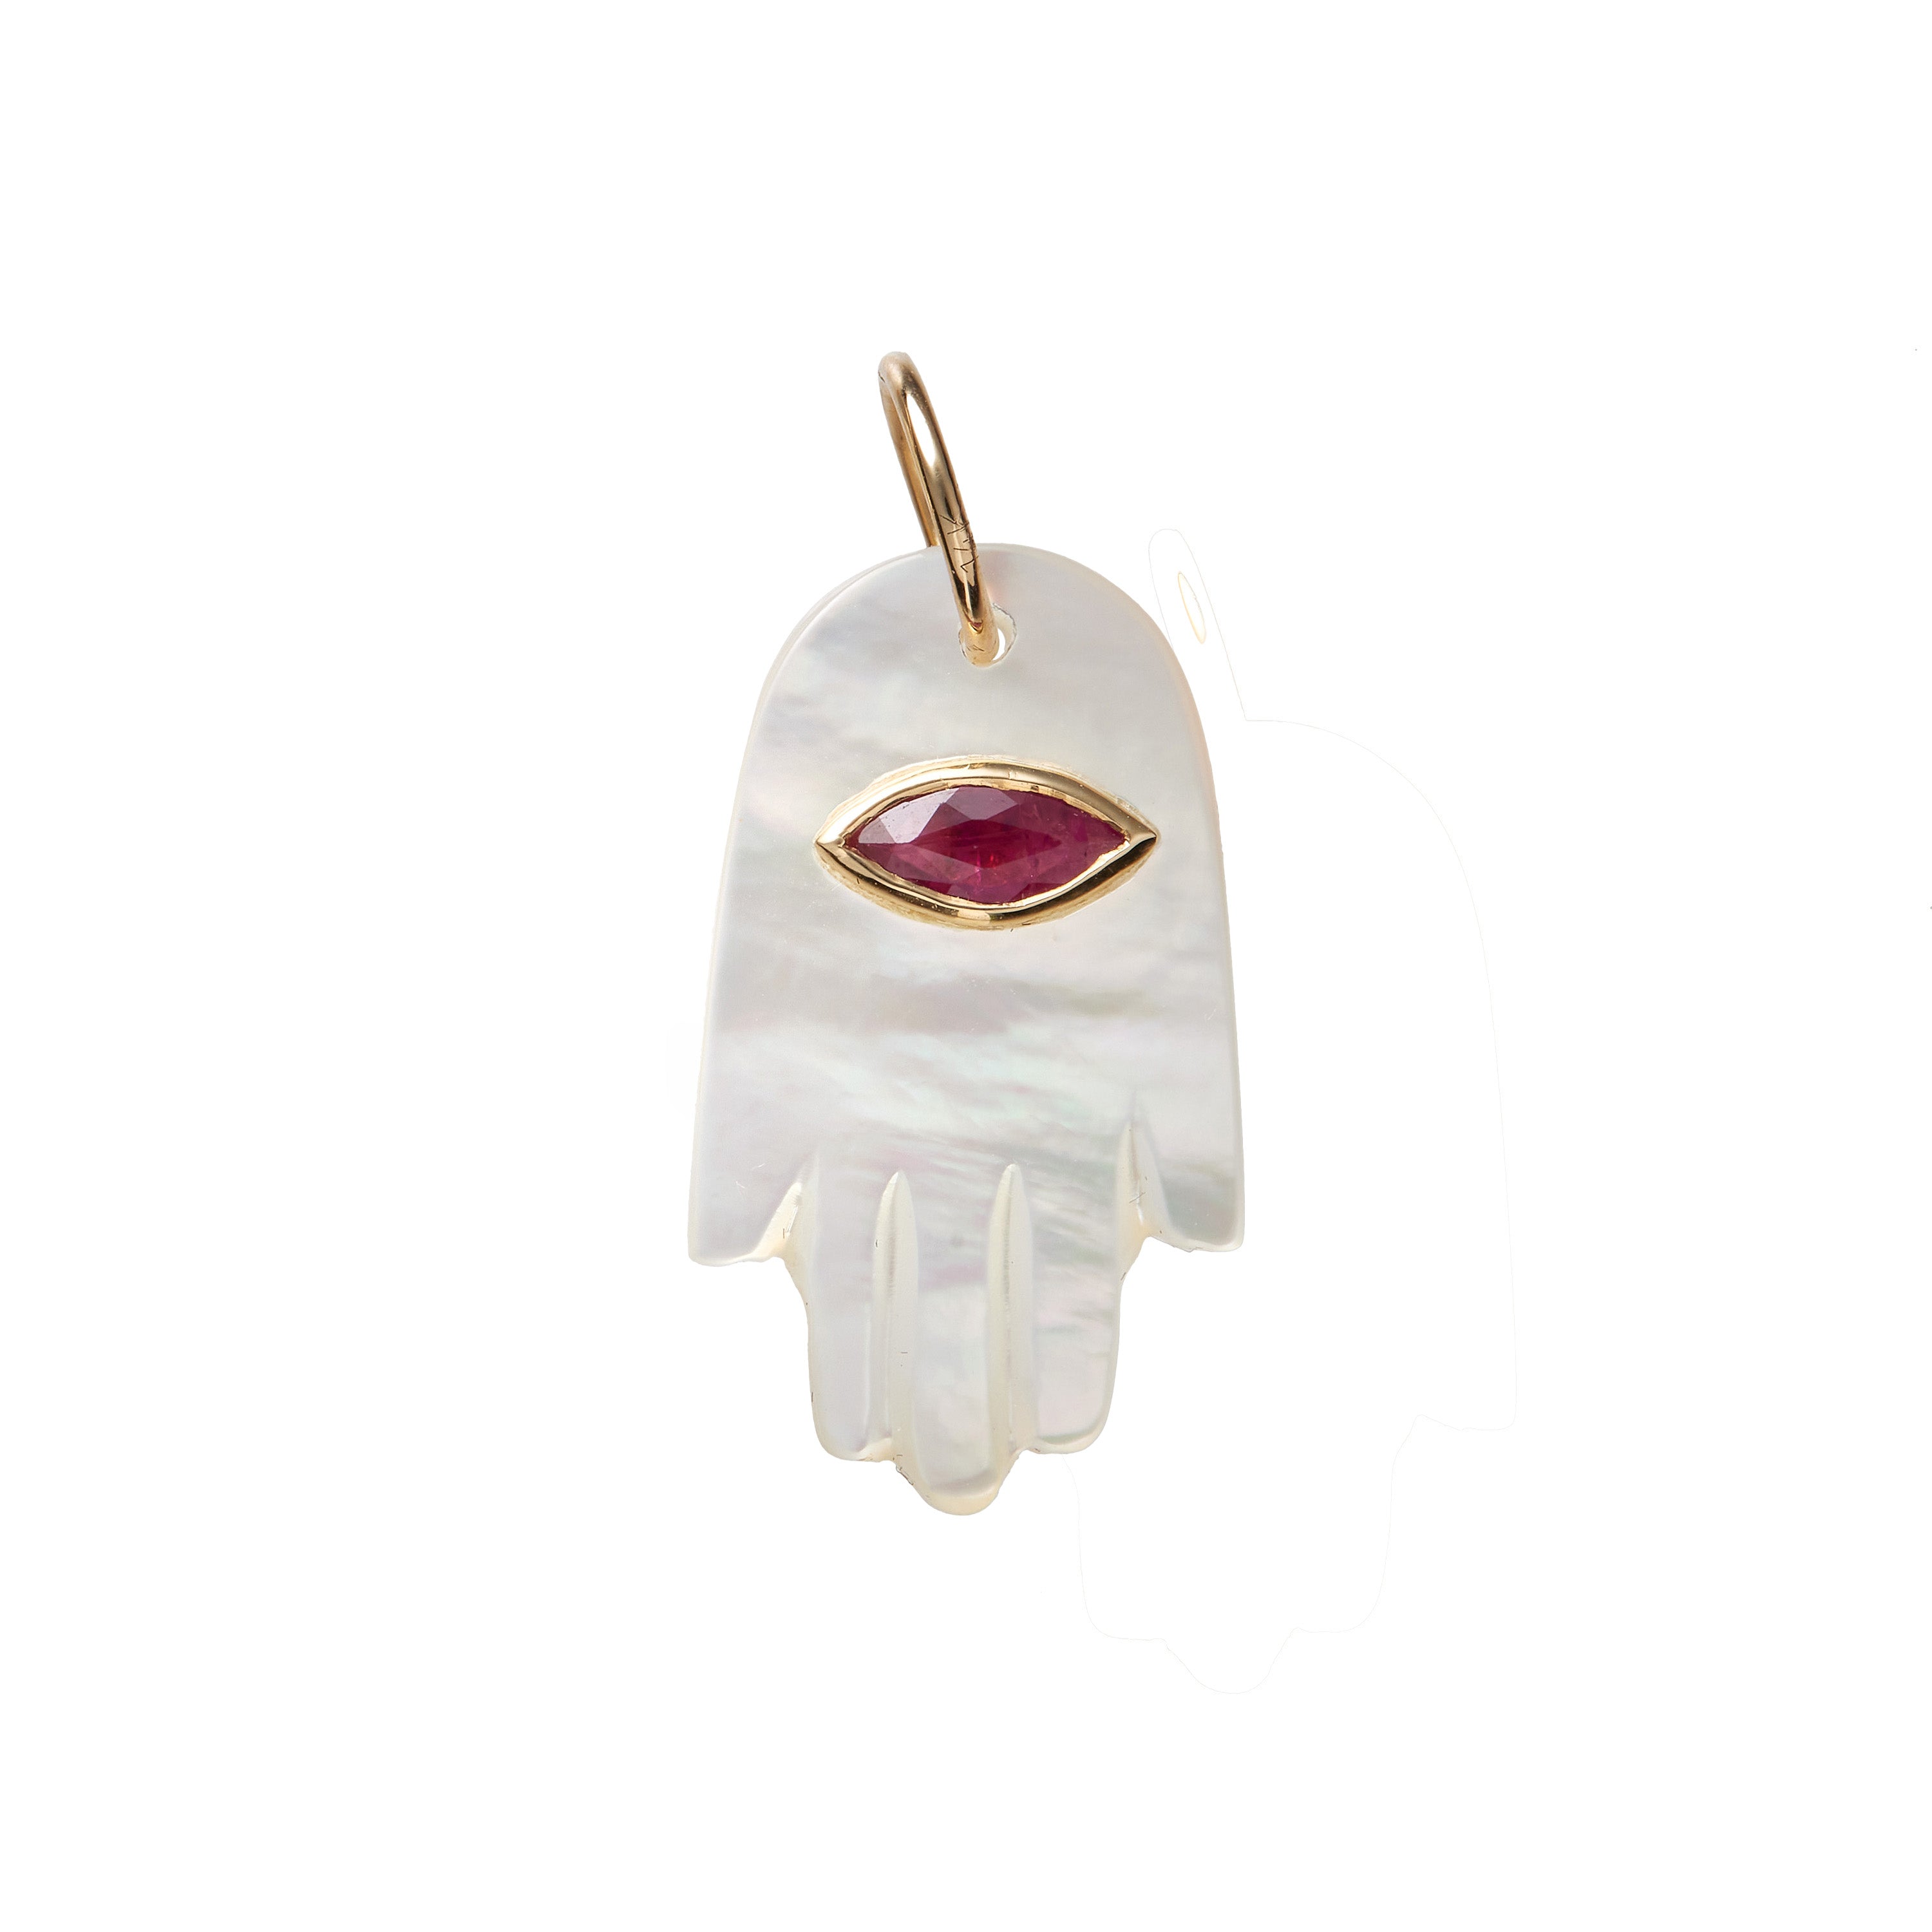 Mother of Pearl + Ruby Hamsa Charm